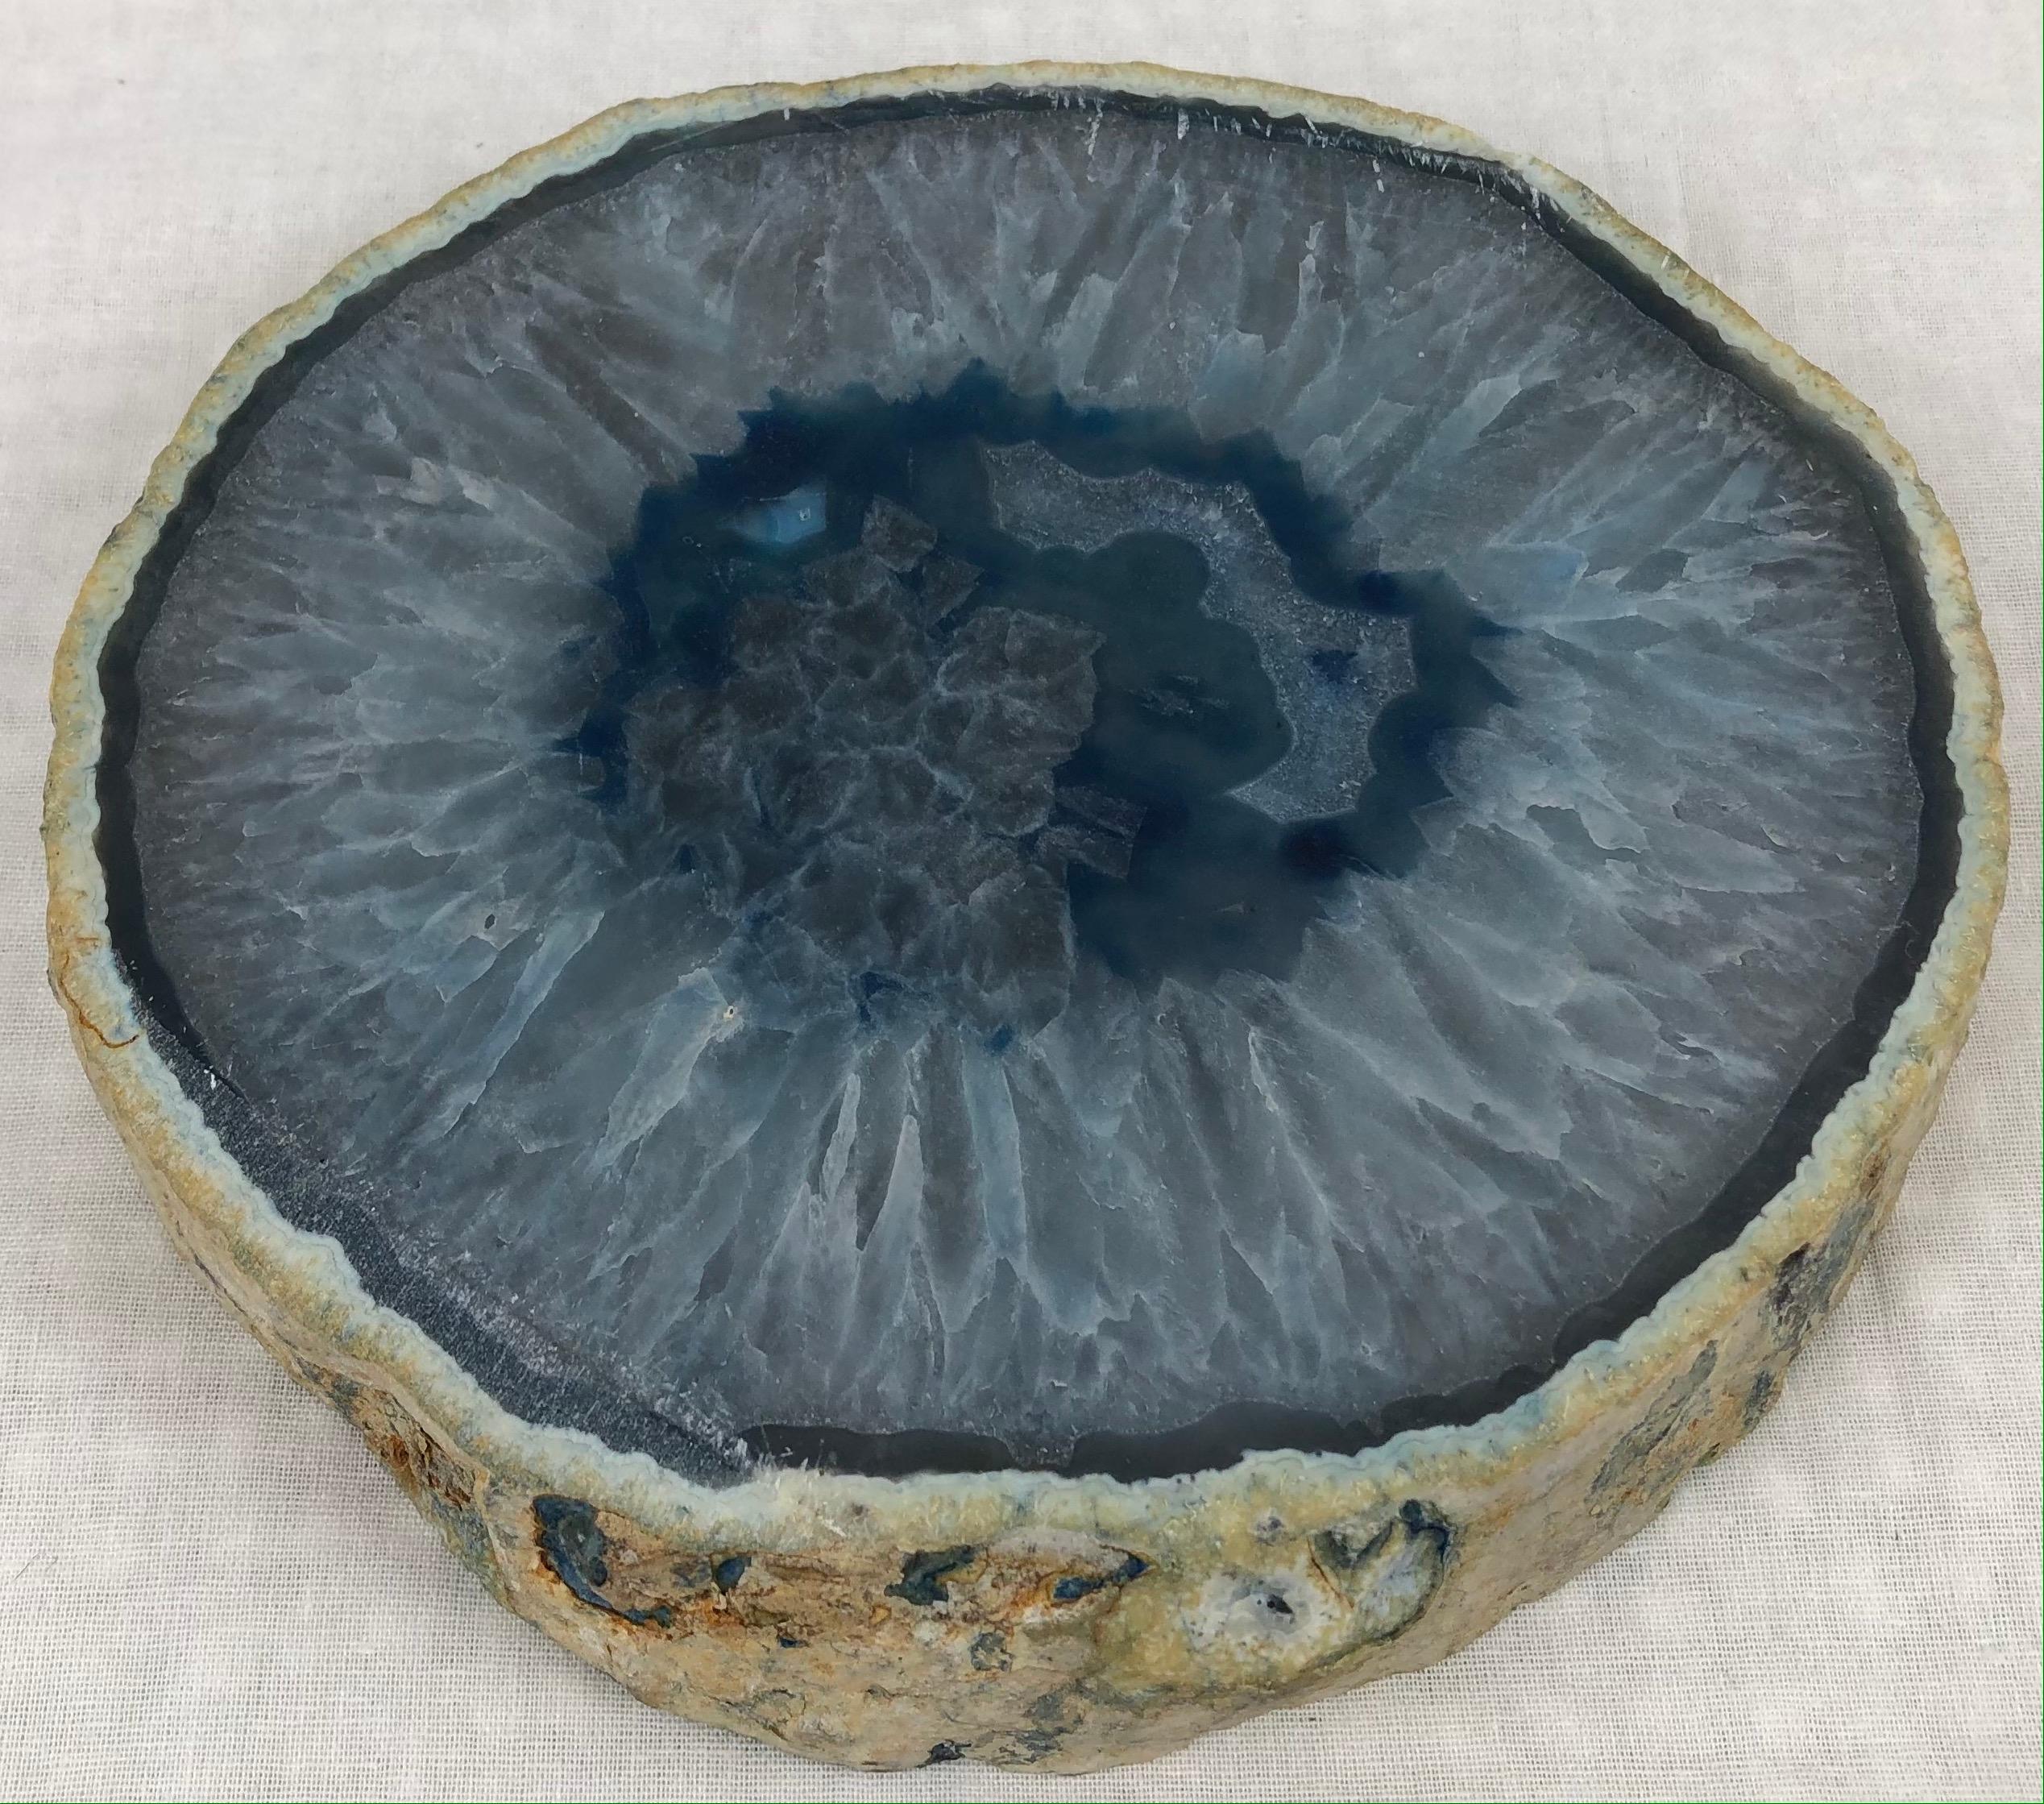 A beautiful blue and white agate/onyx vessel bowl or decorative object. 
Piece can work as a small jewelry dish, standalone piece, key holder/vide poche or paperweight/desk accessory for small items, etc. Elegant and convenient for a table, desk,